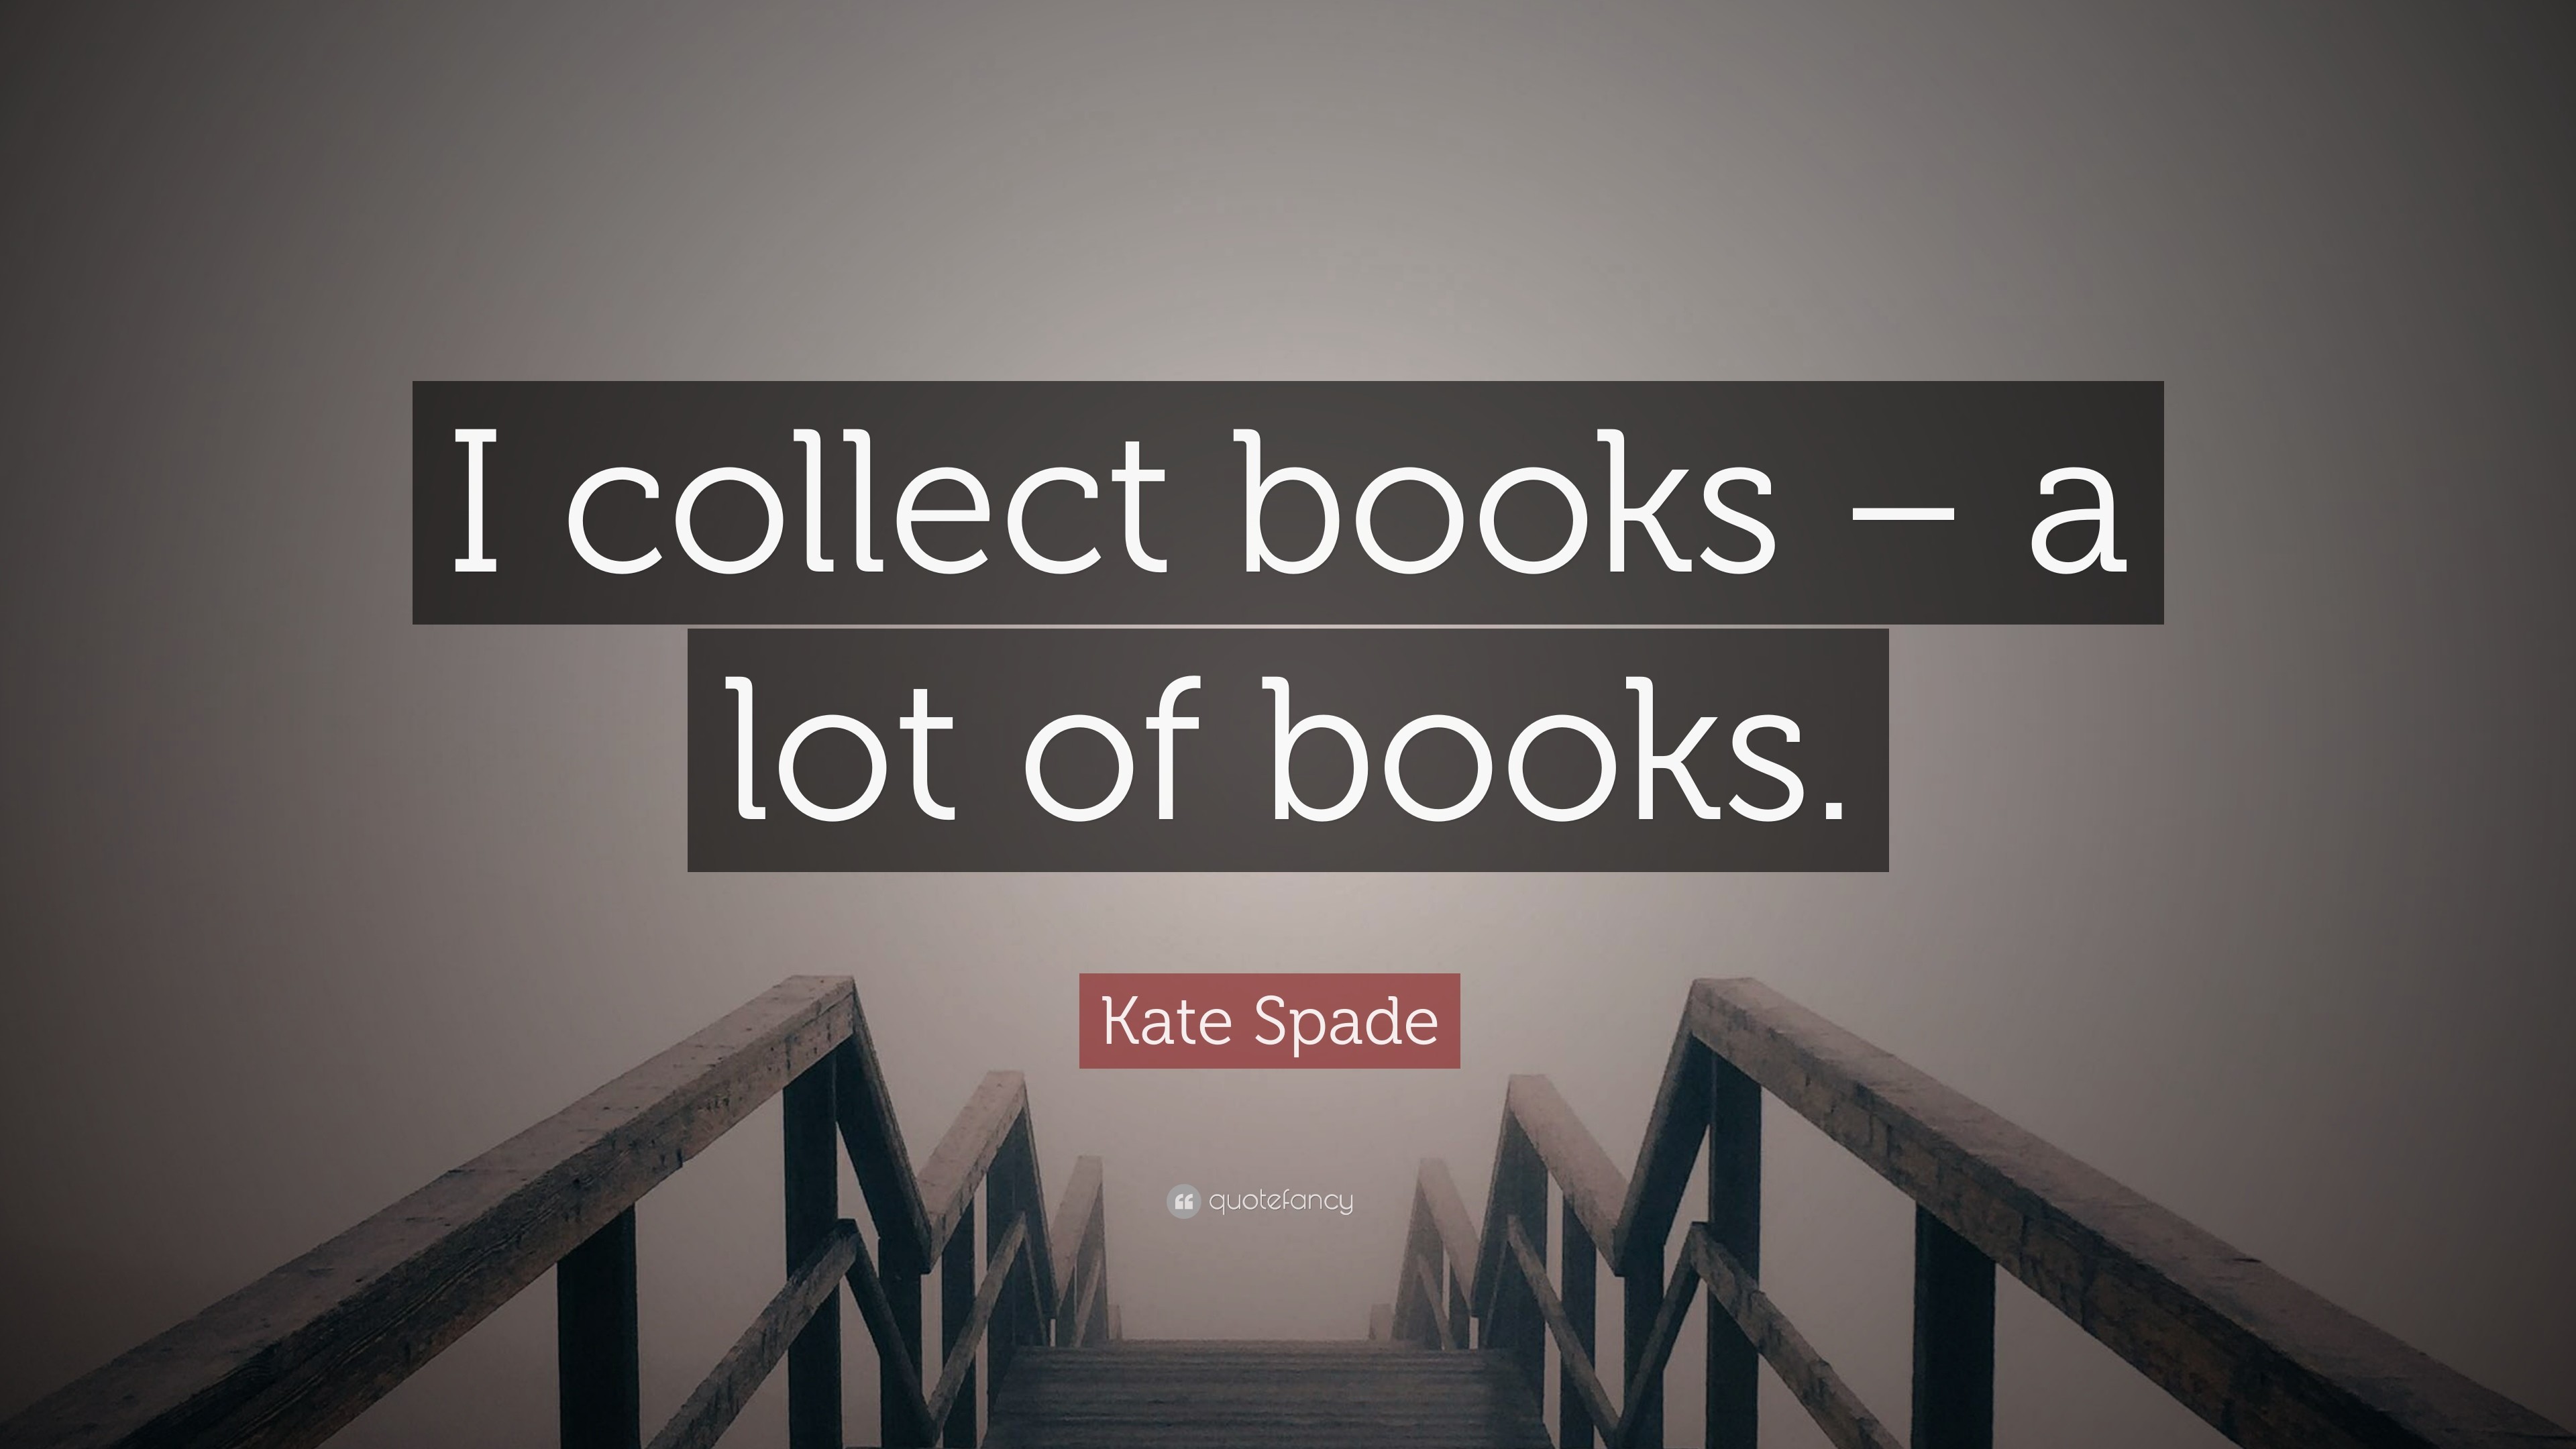 3840x2160 Kate Spade Quote: “I collect books – a lot of books.”